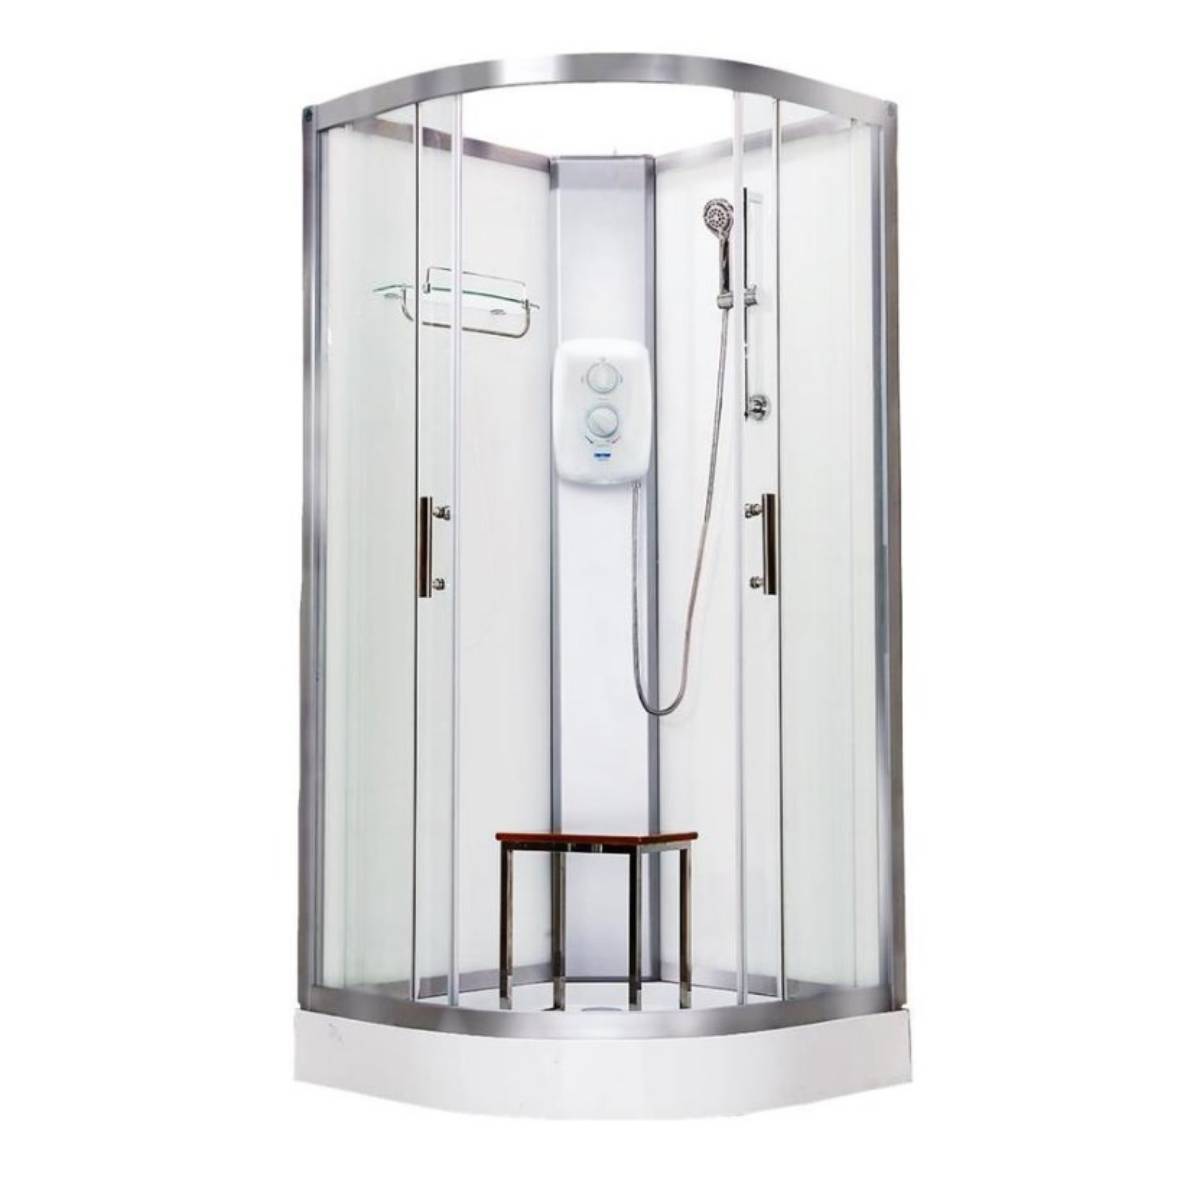 Vidalux Pure Electric 900mm Shower Cabin White - Standard 8.5KW (11656)